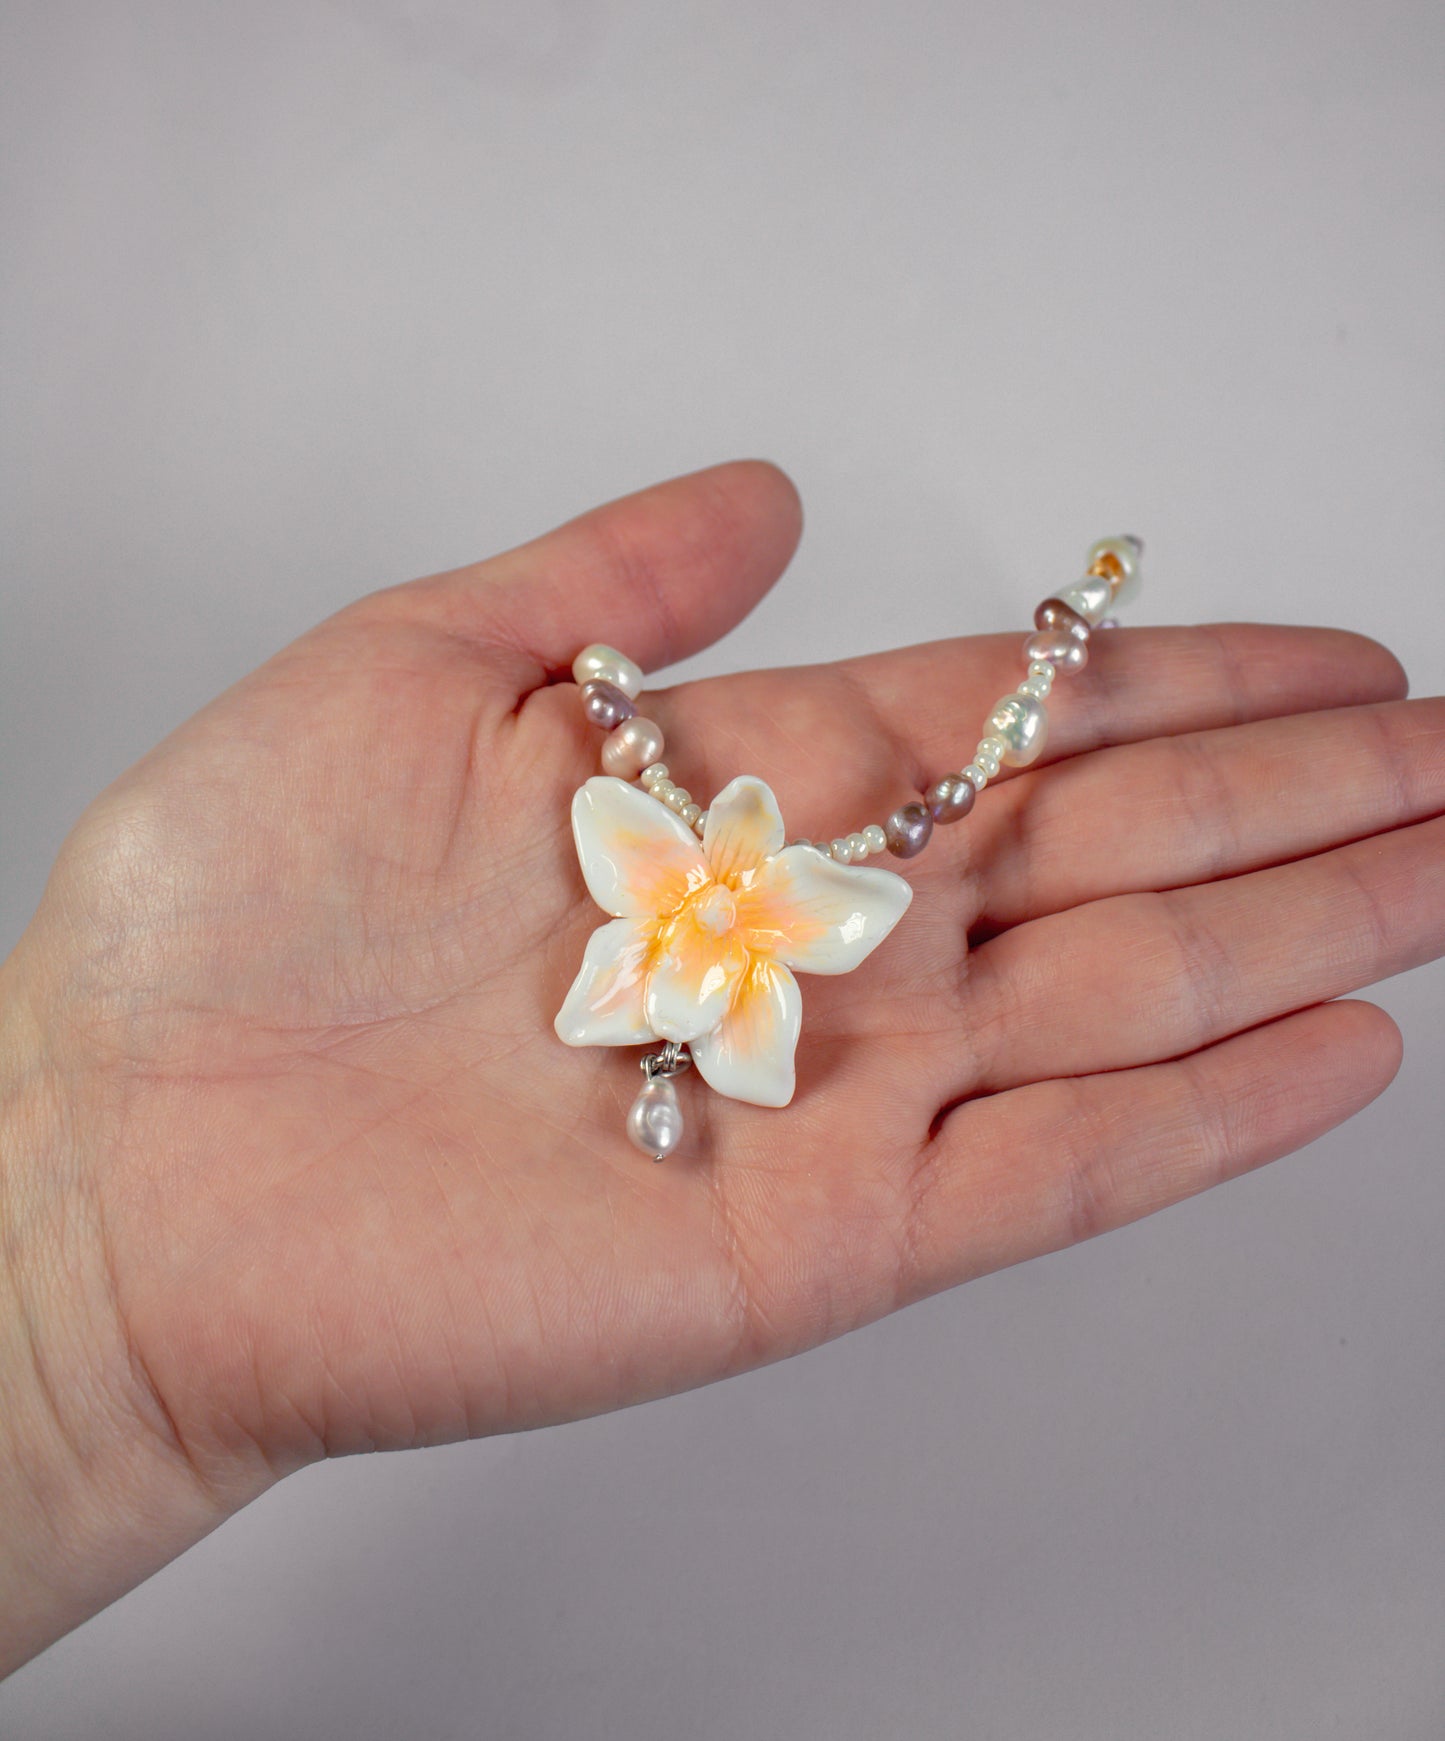 Peachy orchid necklace